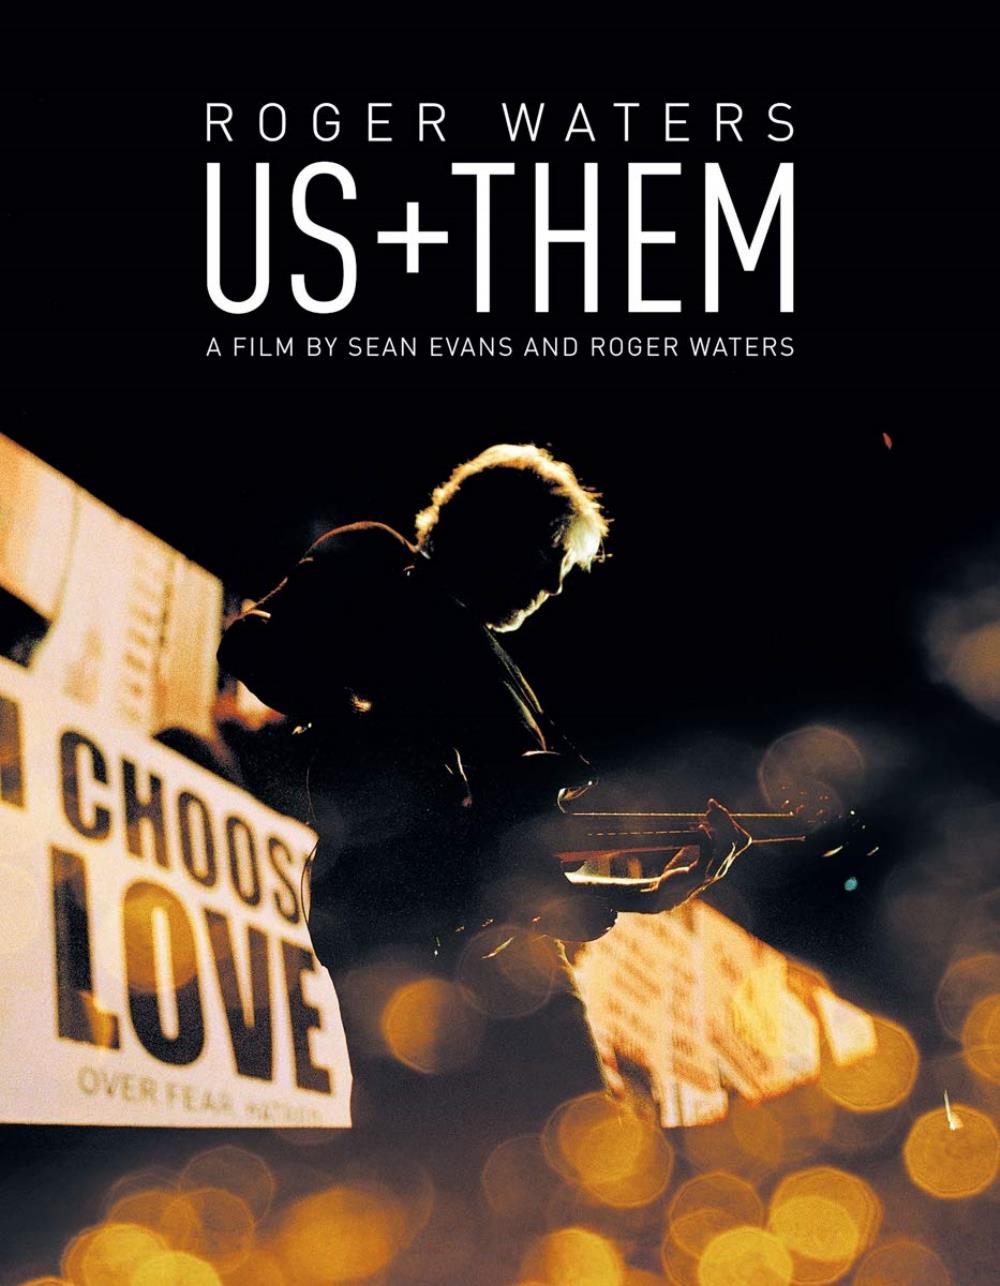 Roger Waters Us + Them album cover